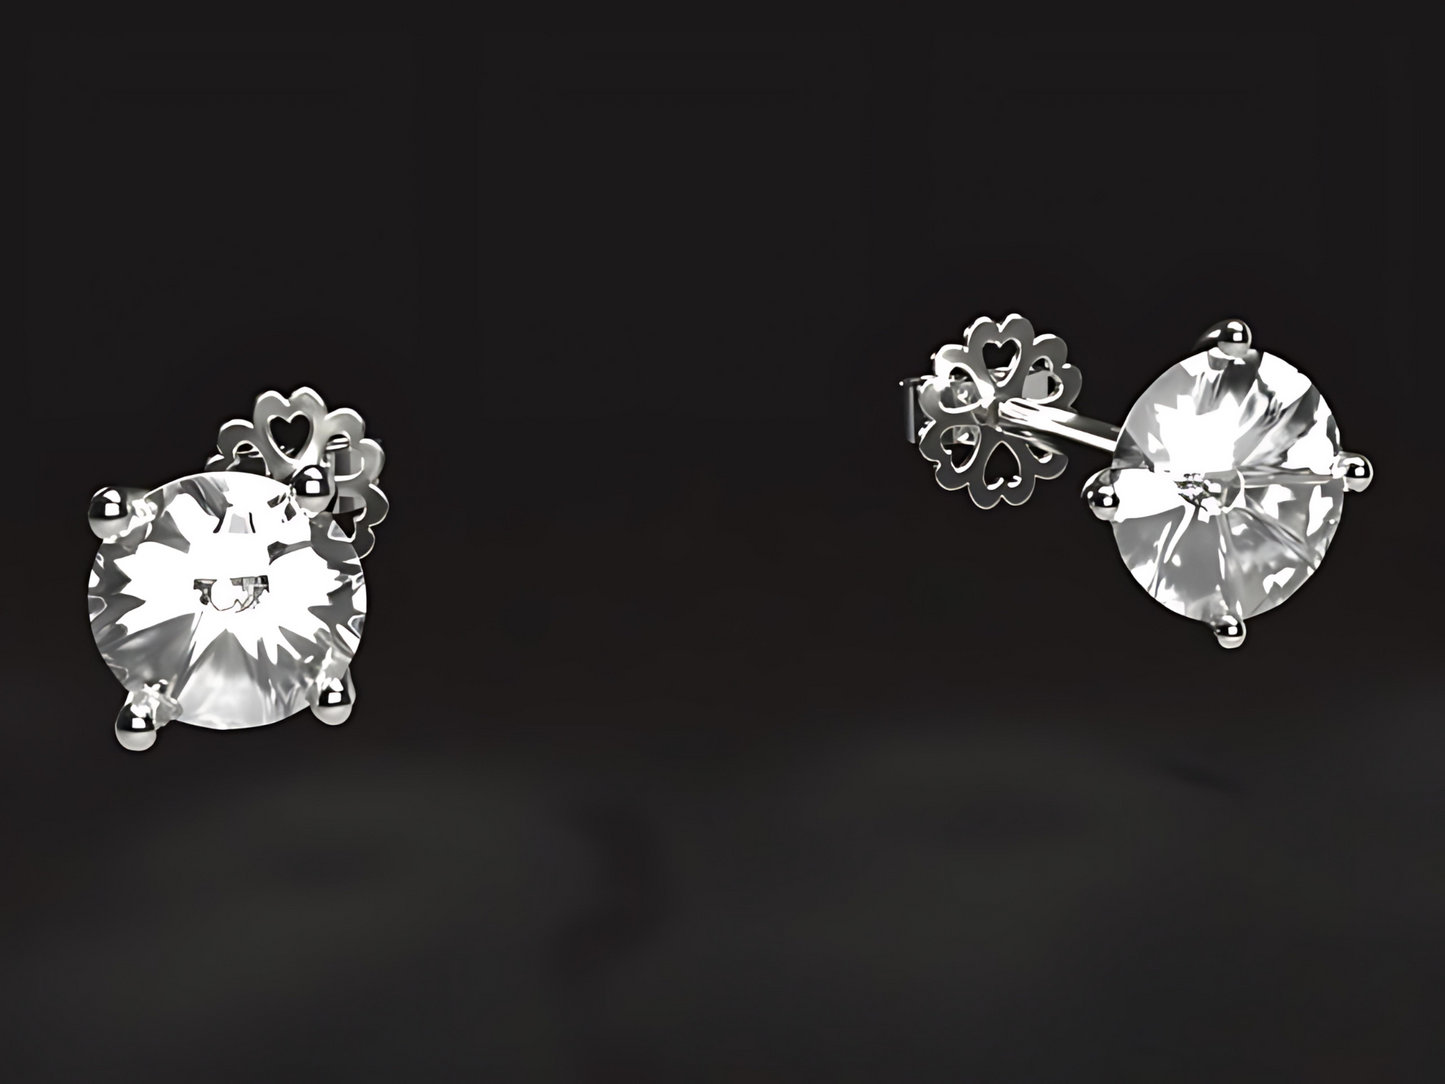 Handmade gold earrings with Vs high quality natural Diamonds.